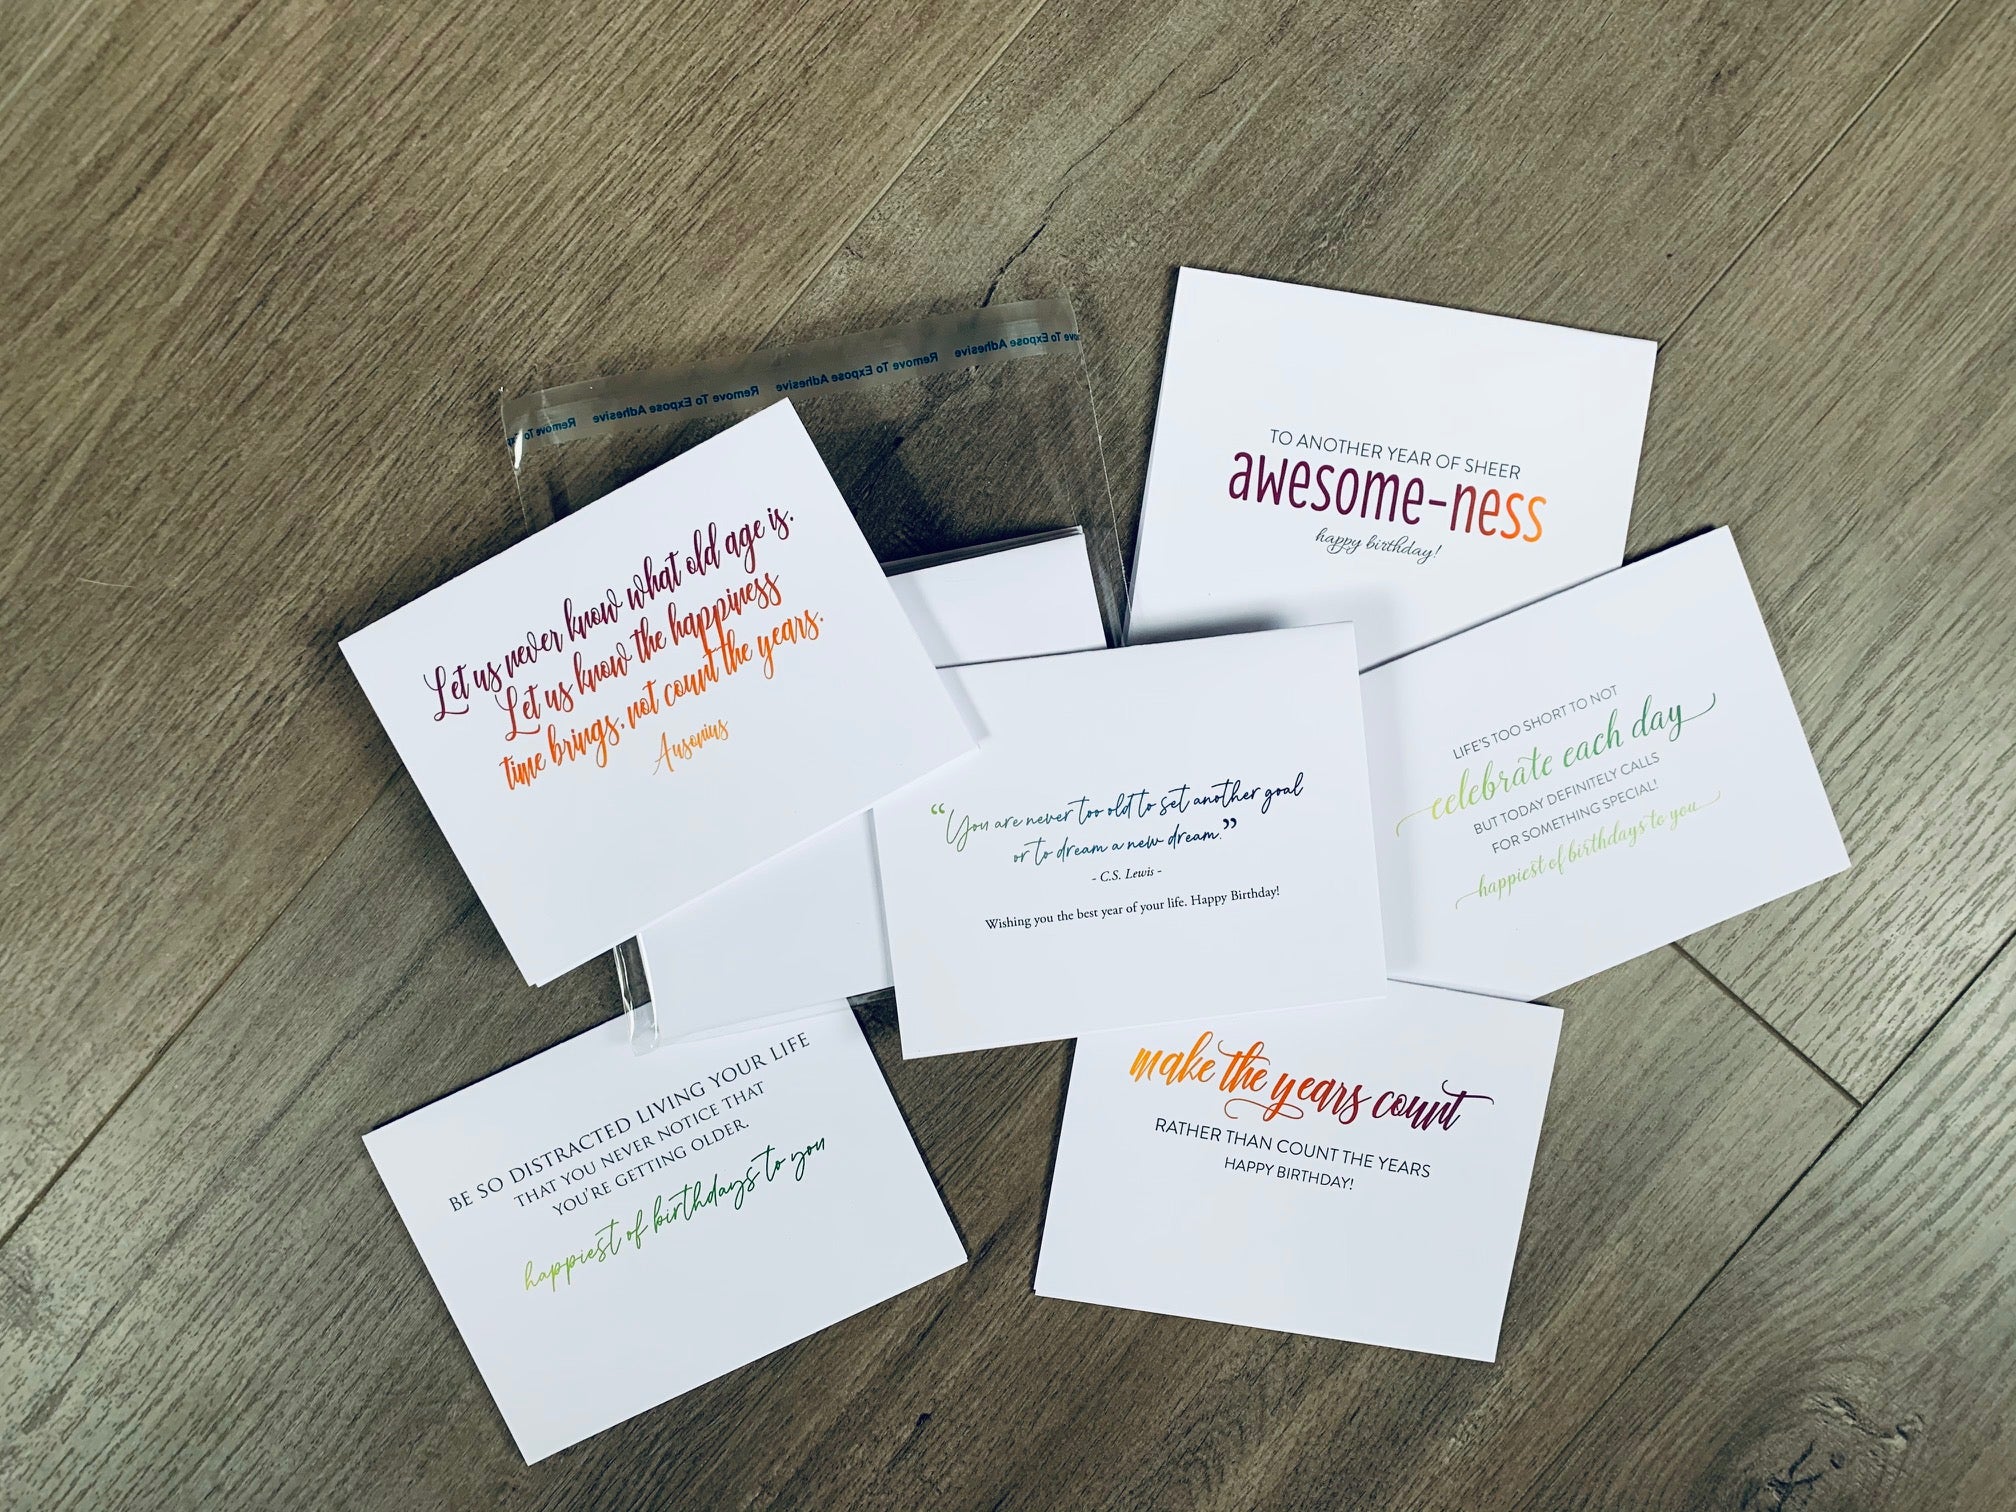 Six white birthday cards are overlapping on a wooden background. Each card is a mix of block and colorful script prints. The sayings are all encouraging, inspiring quotes about celebrating birthdays. Birthday Inspirations by Stationare.